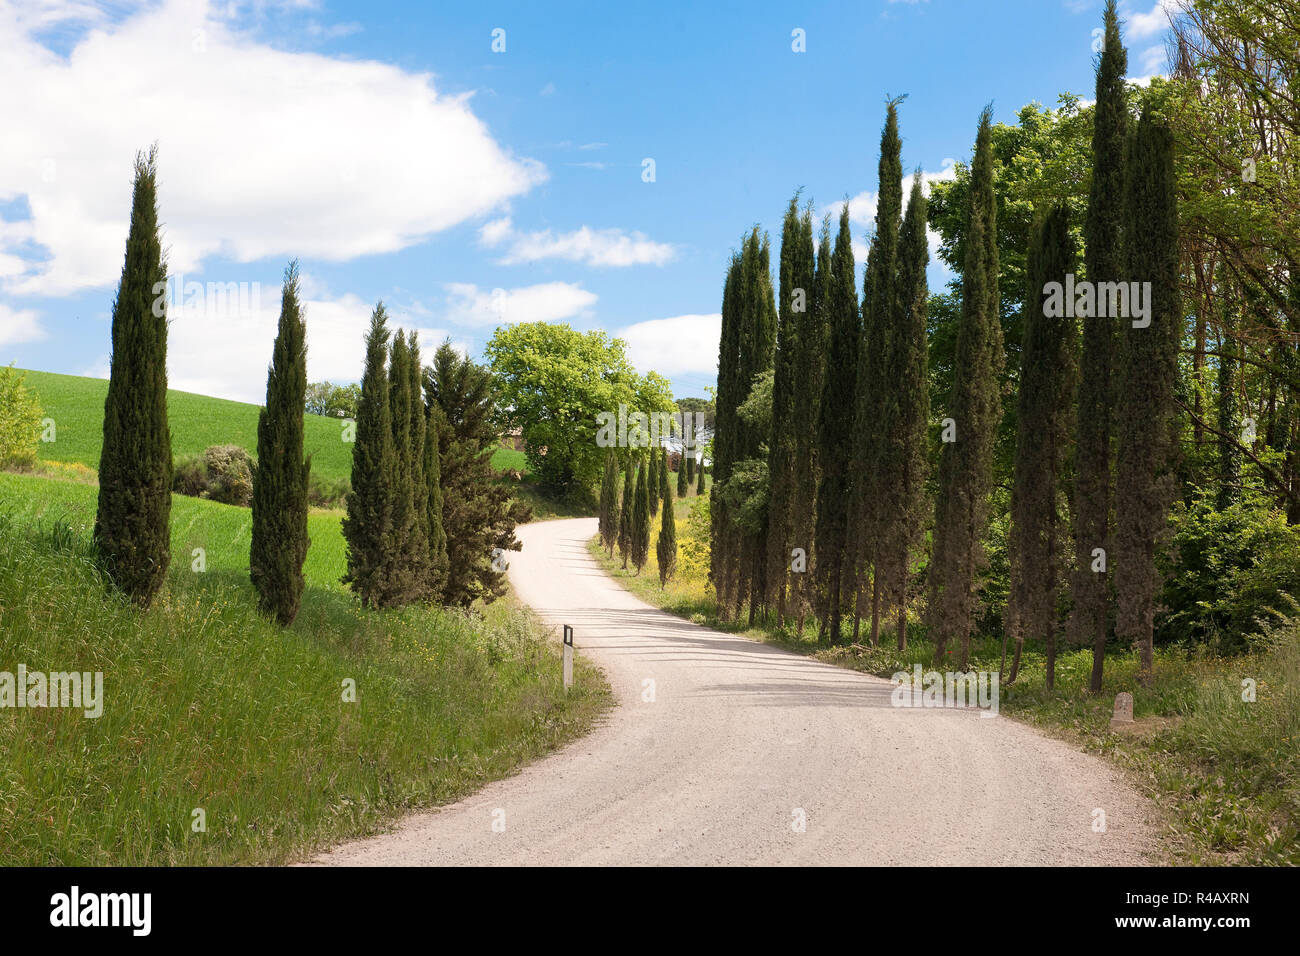 Country Road, cyprès, Toscane, Italie, Europe, (Cupressus sempervirens) Banque D'Images